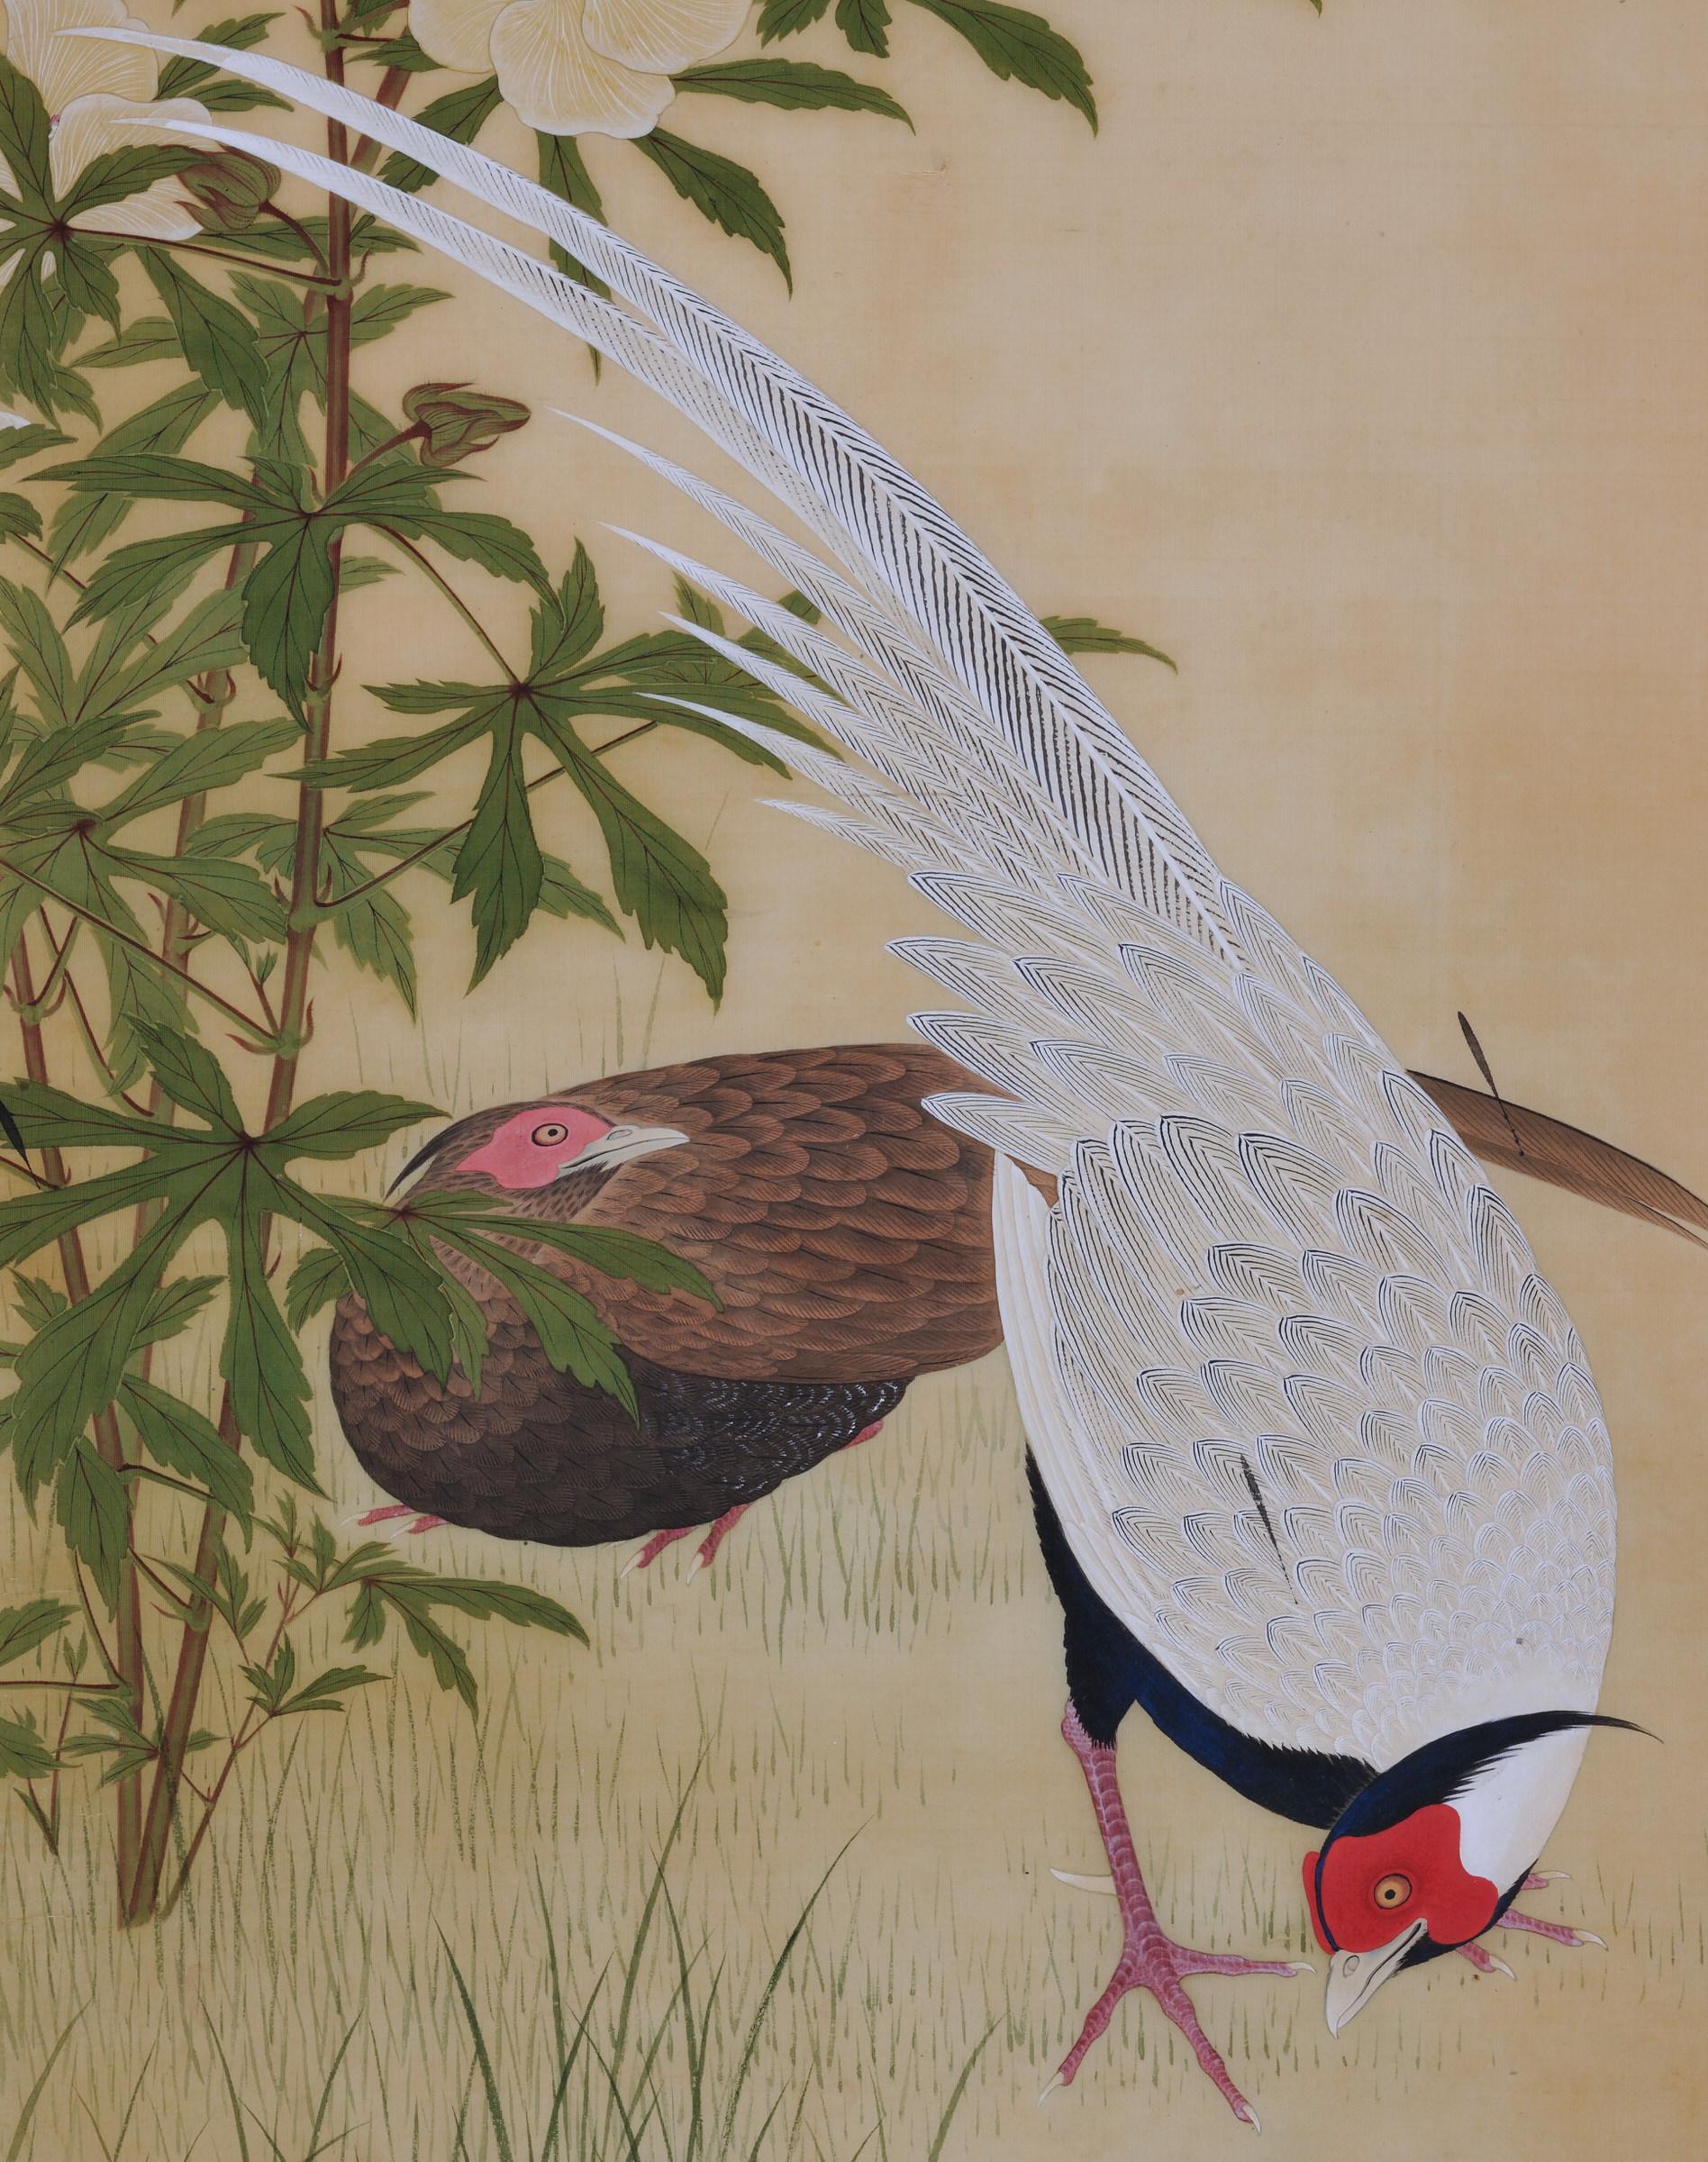 Takakura Zaiko (fl.1854-1860)

Birds and flowers of the seasons.

Silver pheasants and hibiscus.

Ink and color on silk.

Unframed.

Seal: Taka Zaiko no in 

Dimensions:

H 39” x W 16.5” (100 cm x 42.5 cm)

Bird and flower paintings